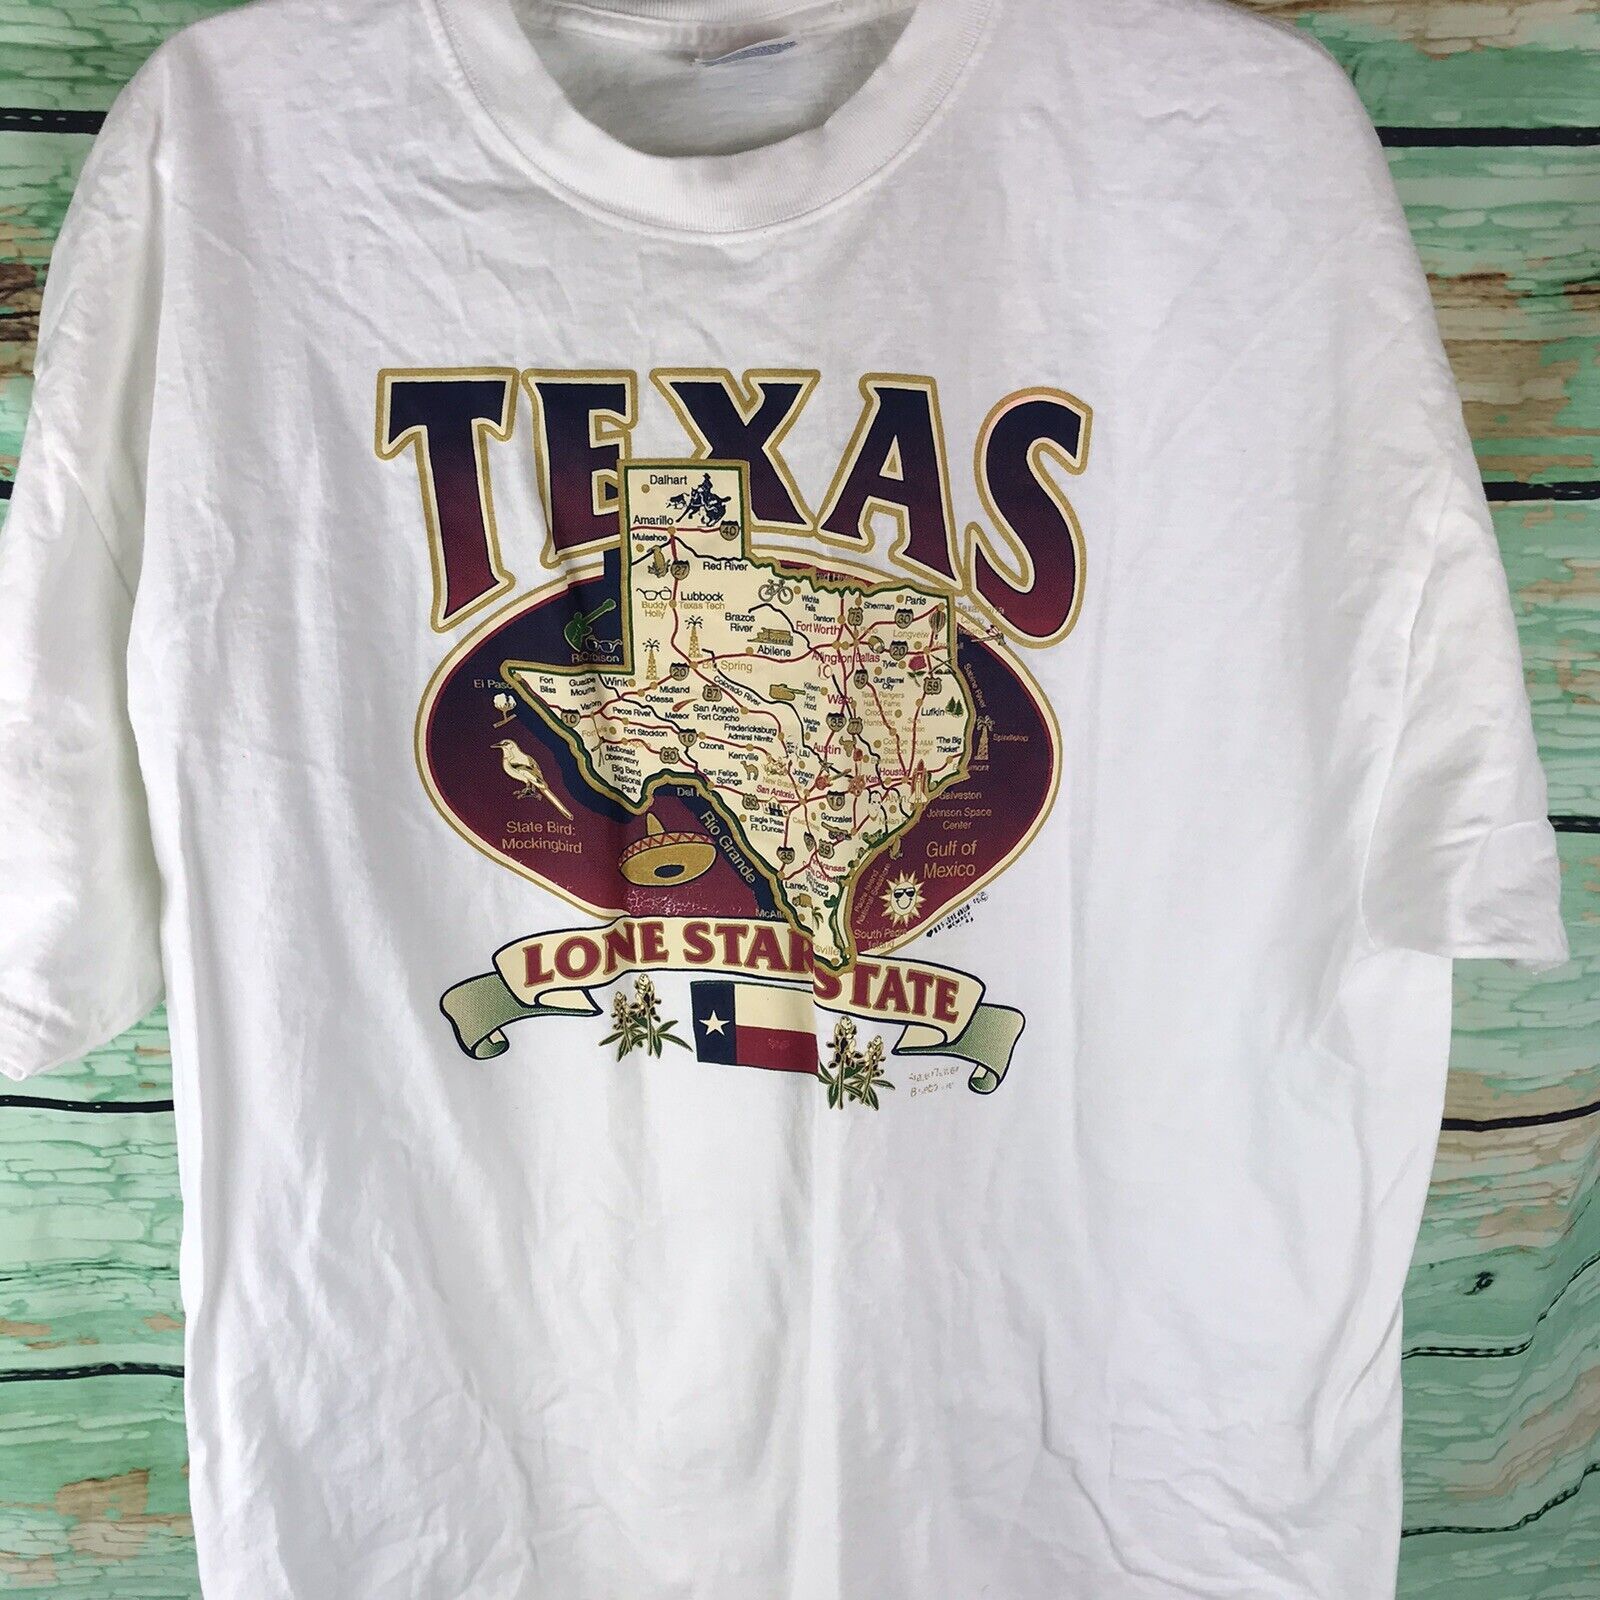 Primary image for Vtg Texas Tee XL 90s Lone Star State graphic T-shirt Travel Vacation Souvenir